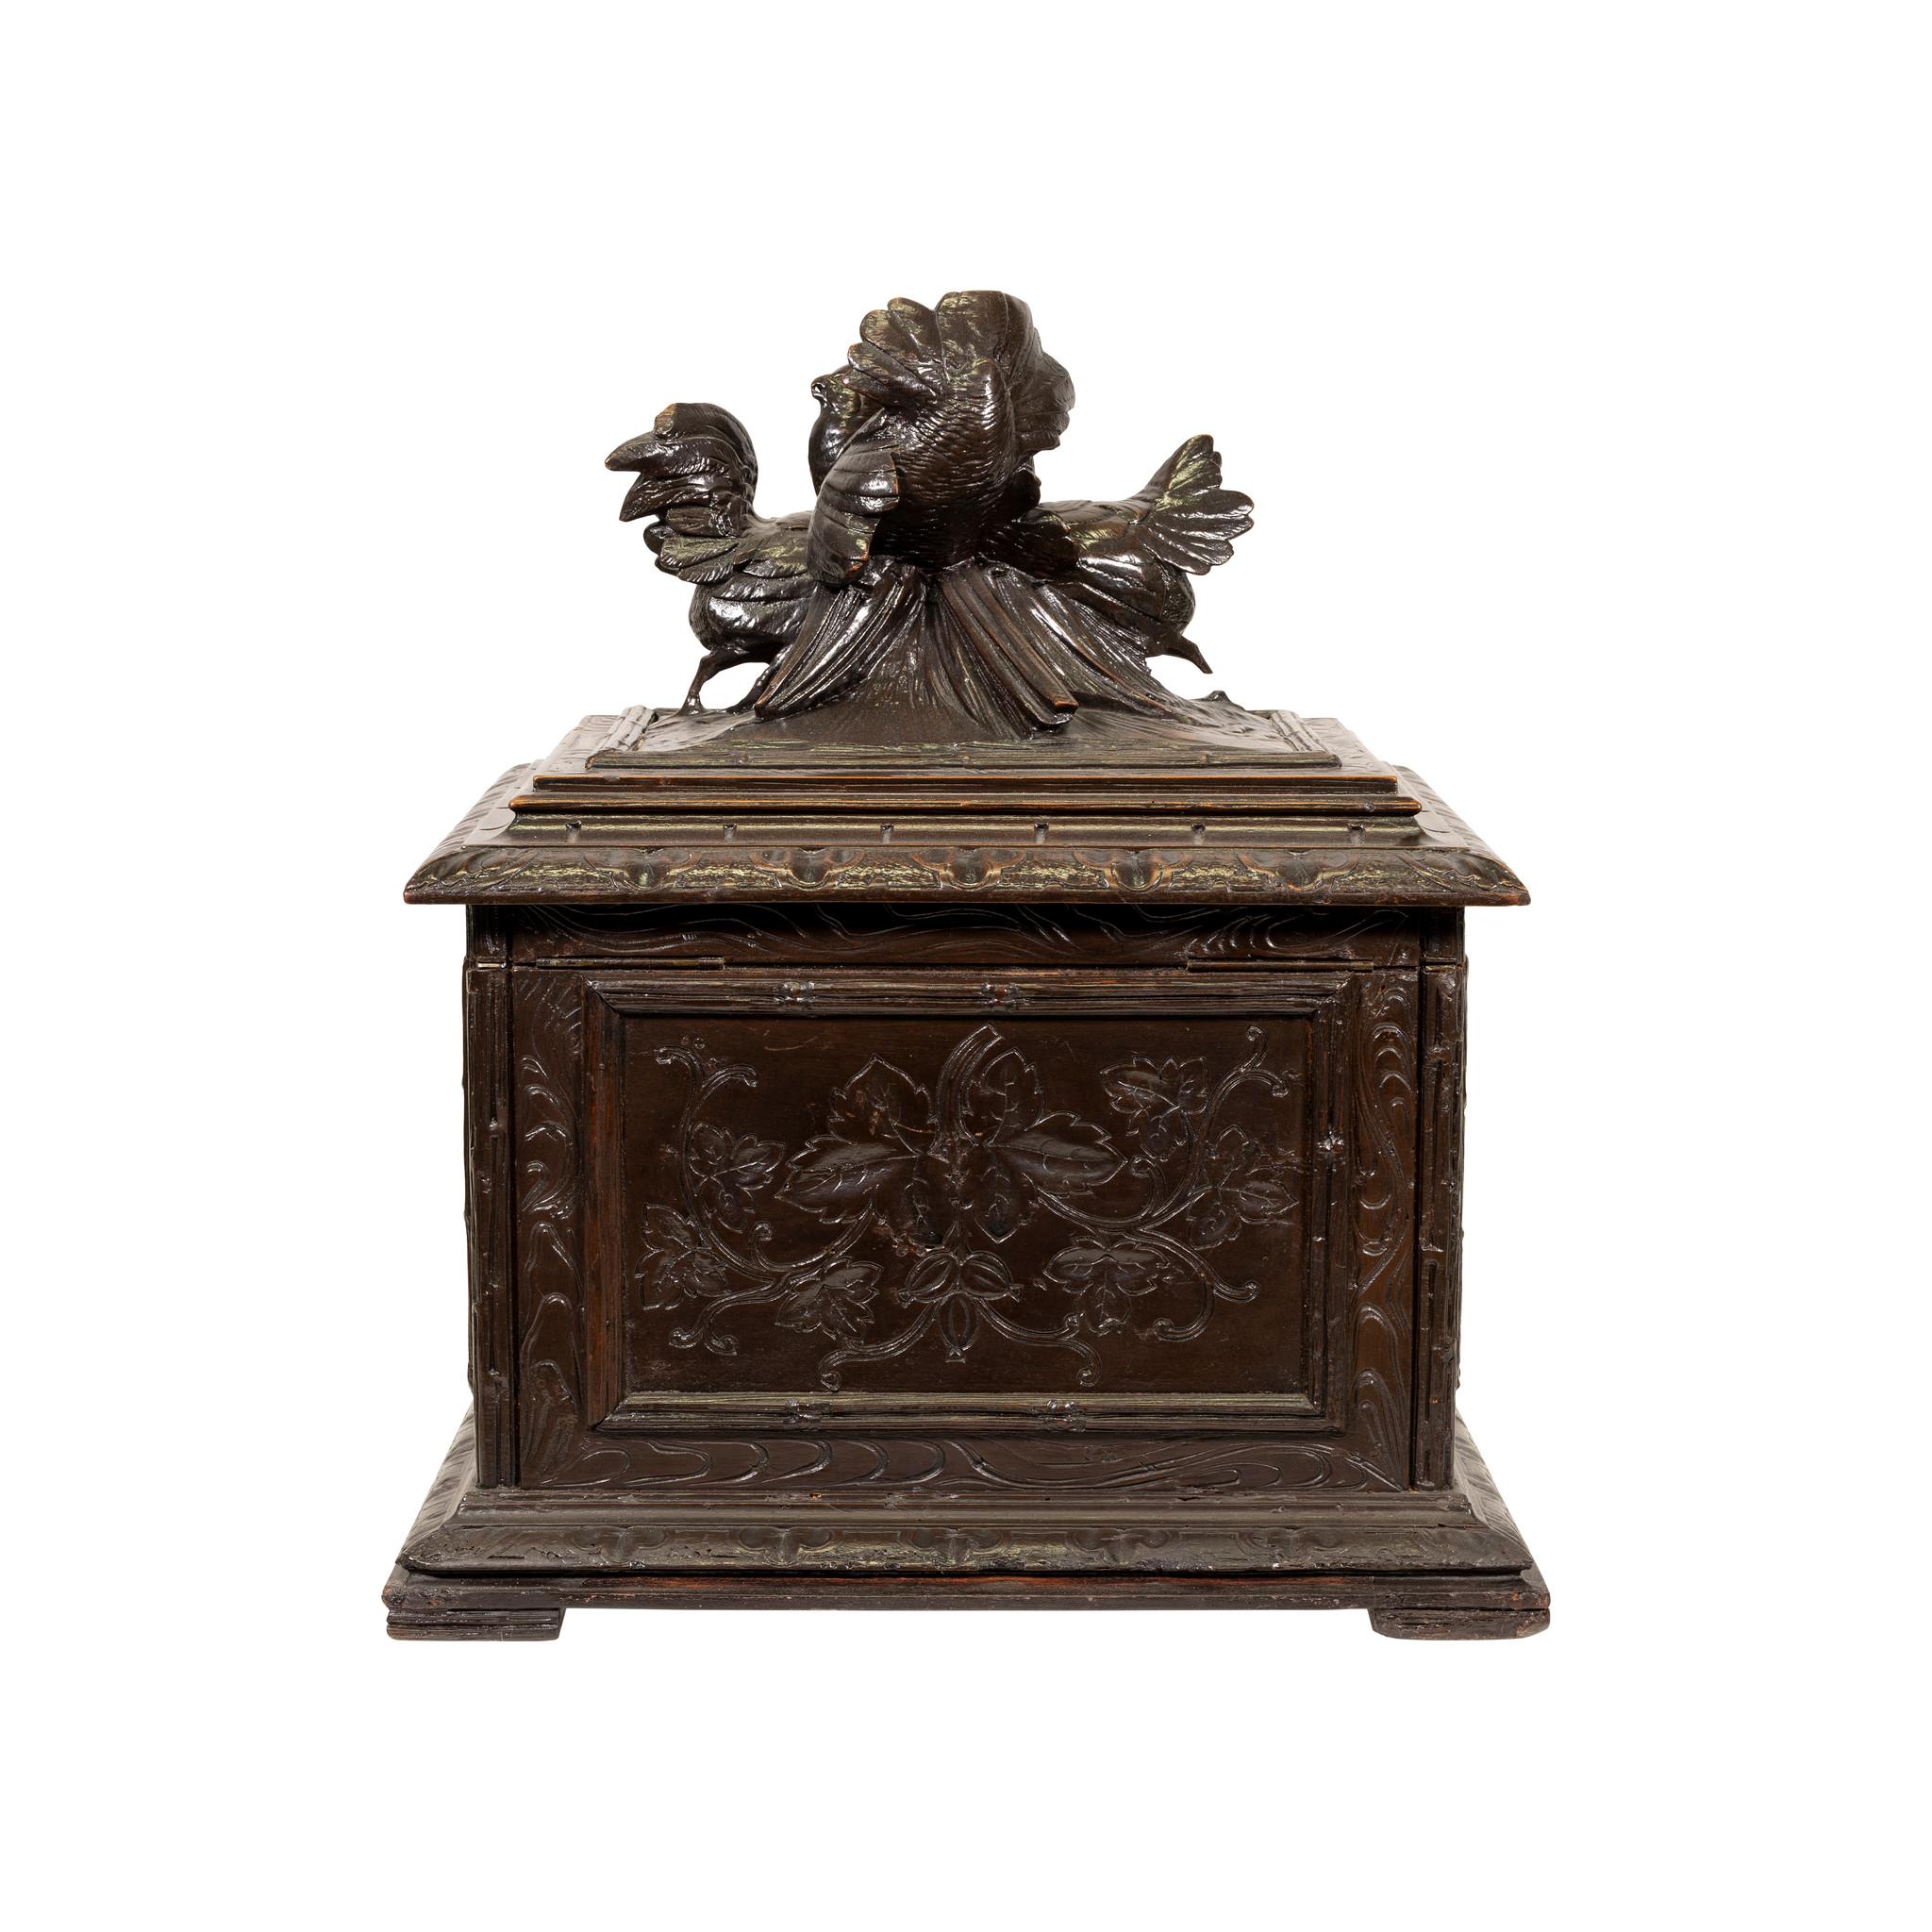 19th Century Black Forest Carved Tantalus In Good Condition For Sale In Coeur d'Alene, ID